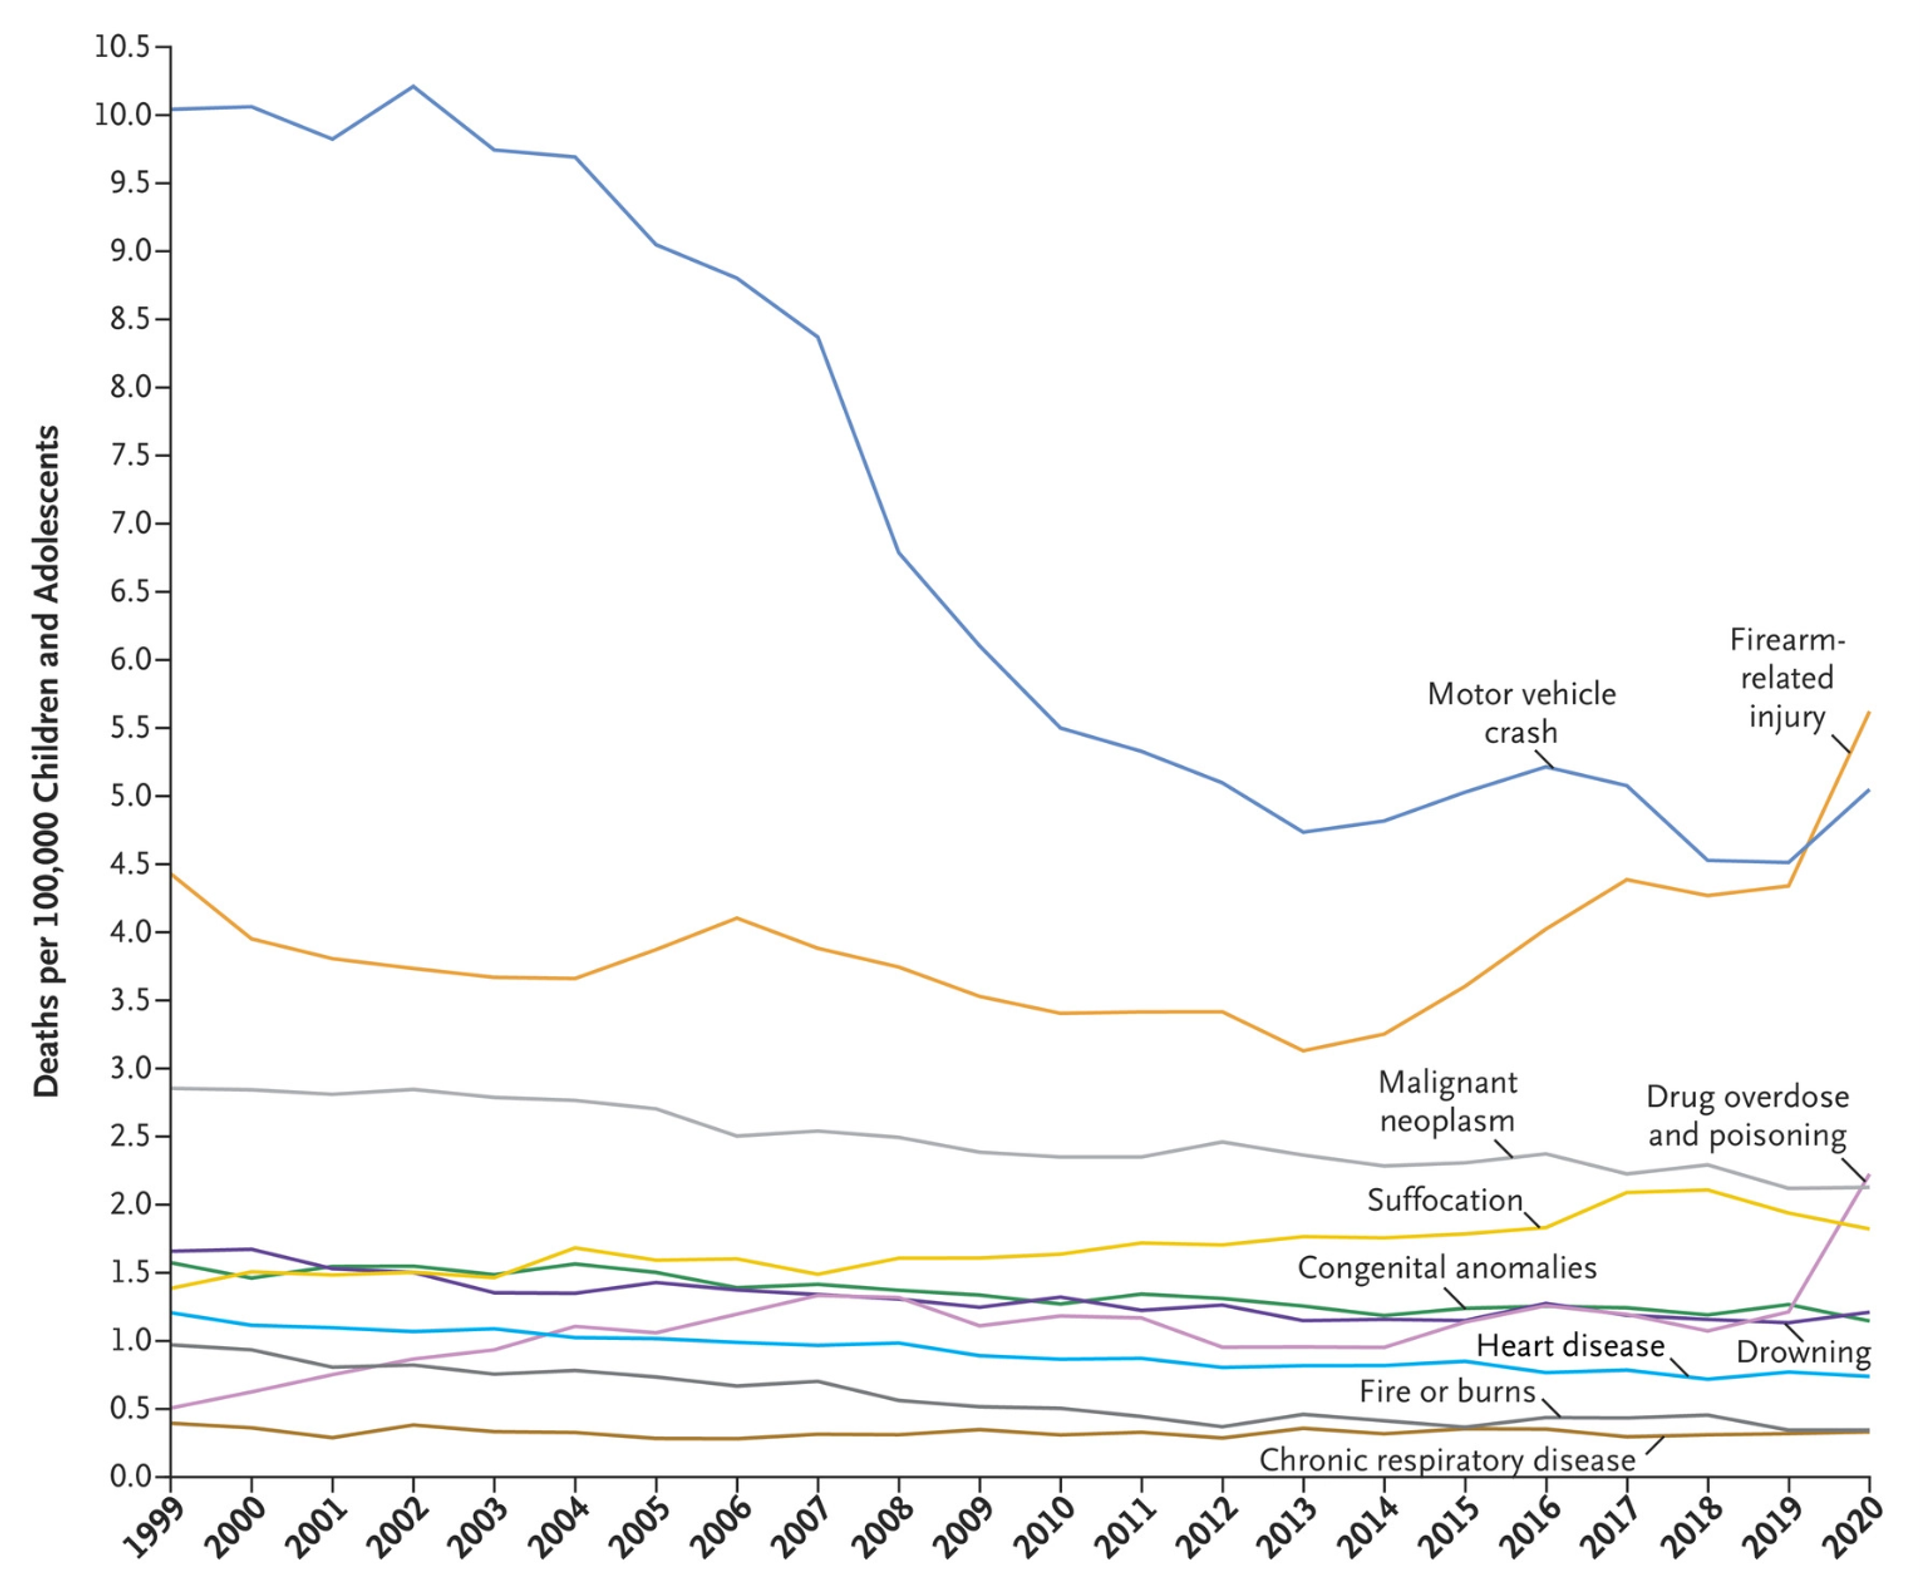 Leading Causes of Death among Children and Adolescents in the United States, 1999 through 2020. Children and adolescents are defined as persons 1 to 19 years of age. - Sputnik International, 1920, 26.05.2022